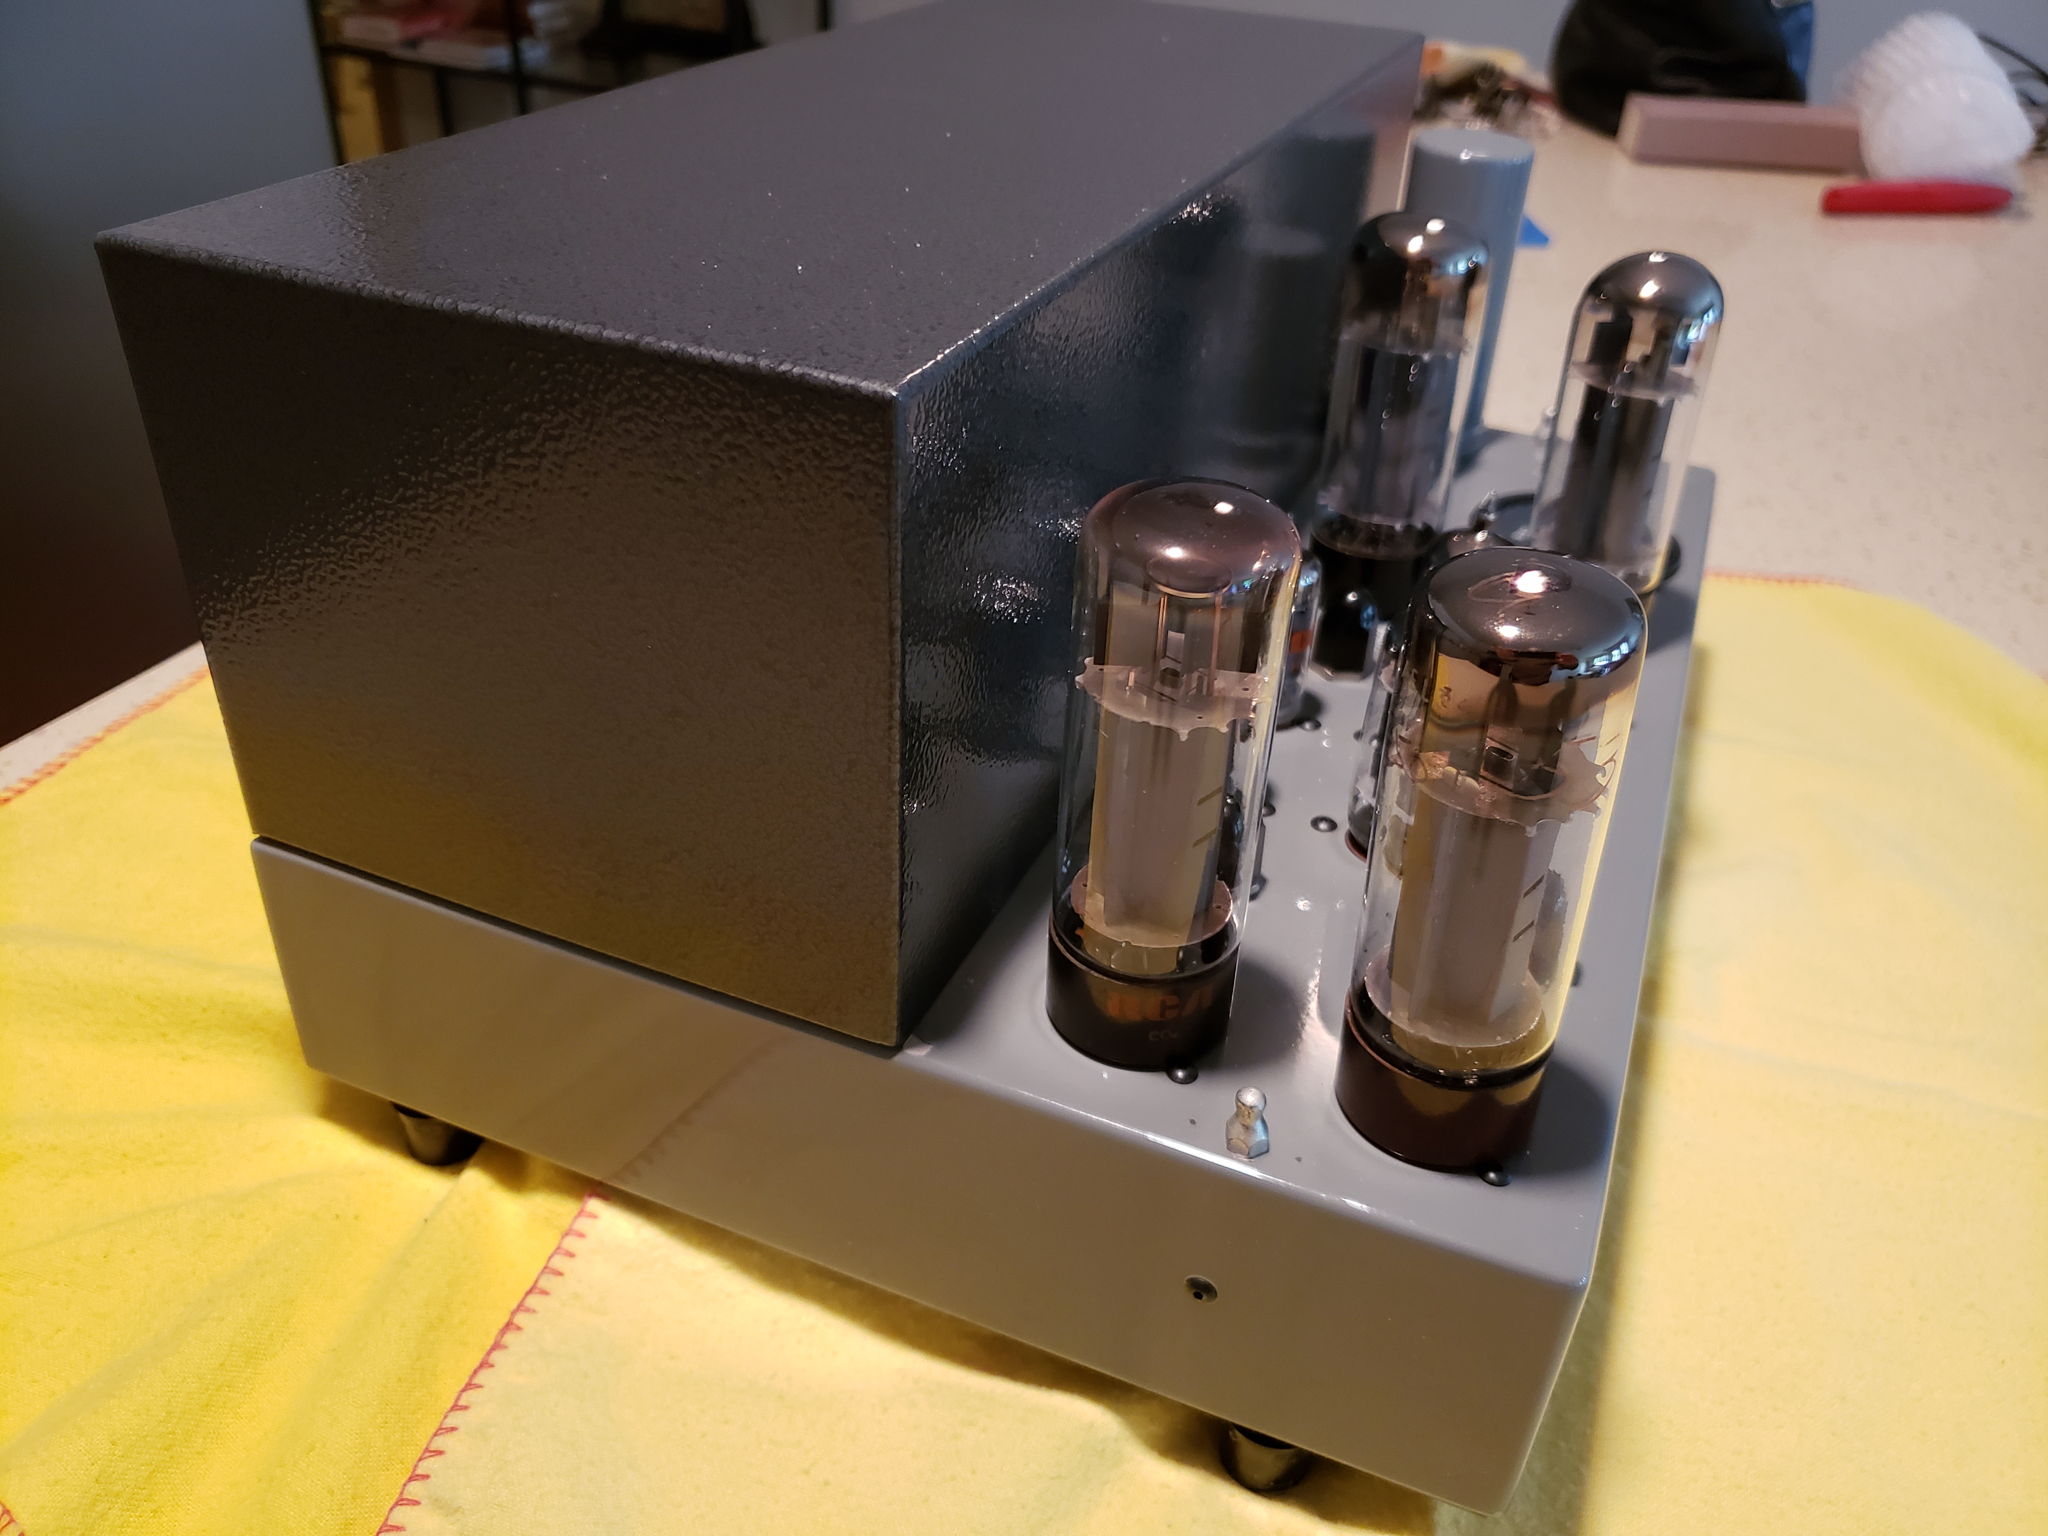 VAC Auricle Mk 1 stereo amplifier 3